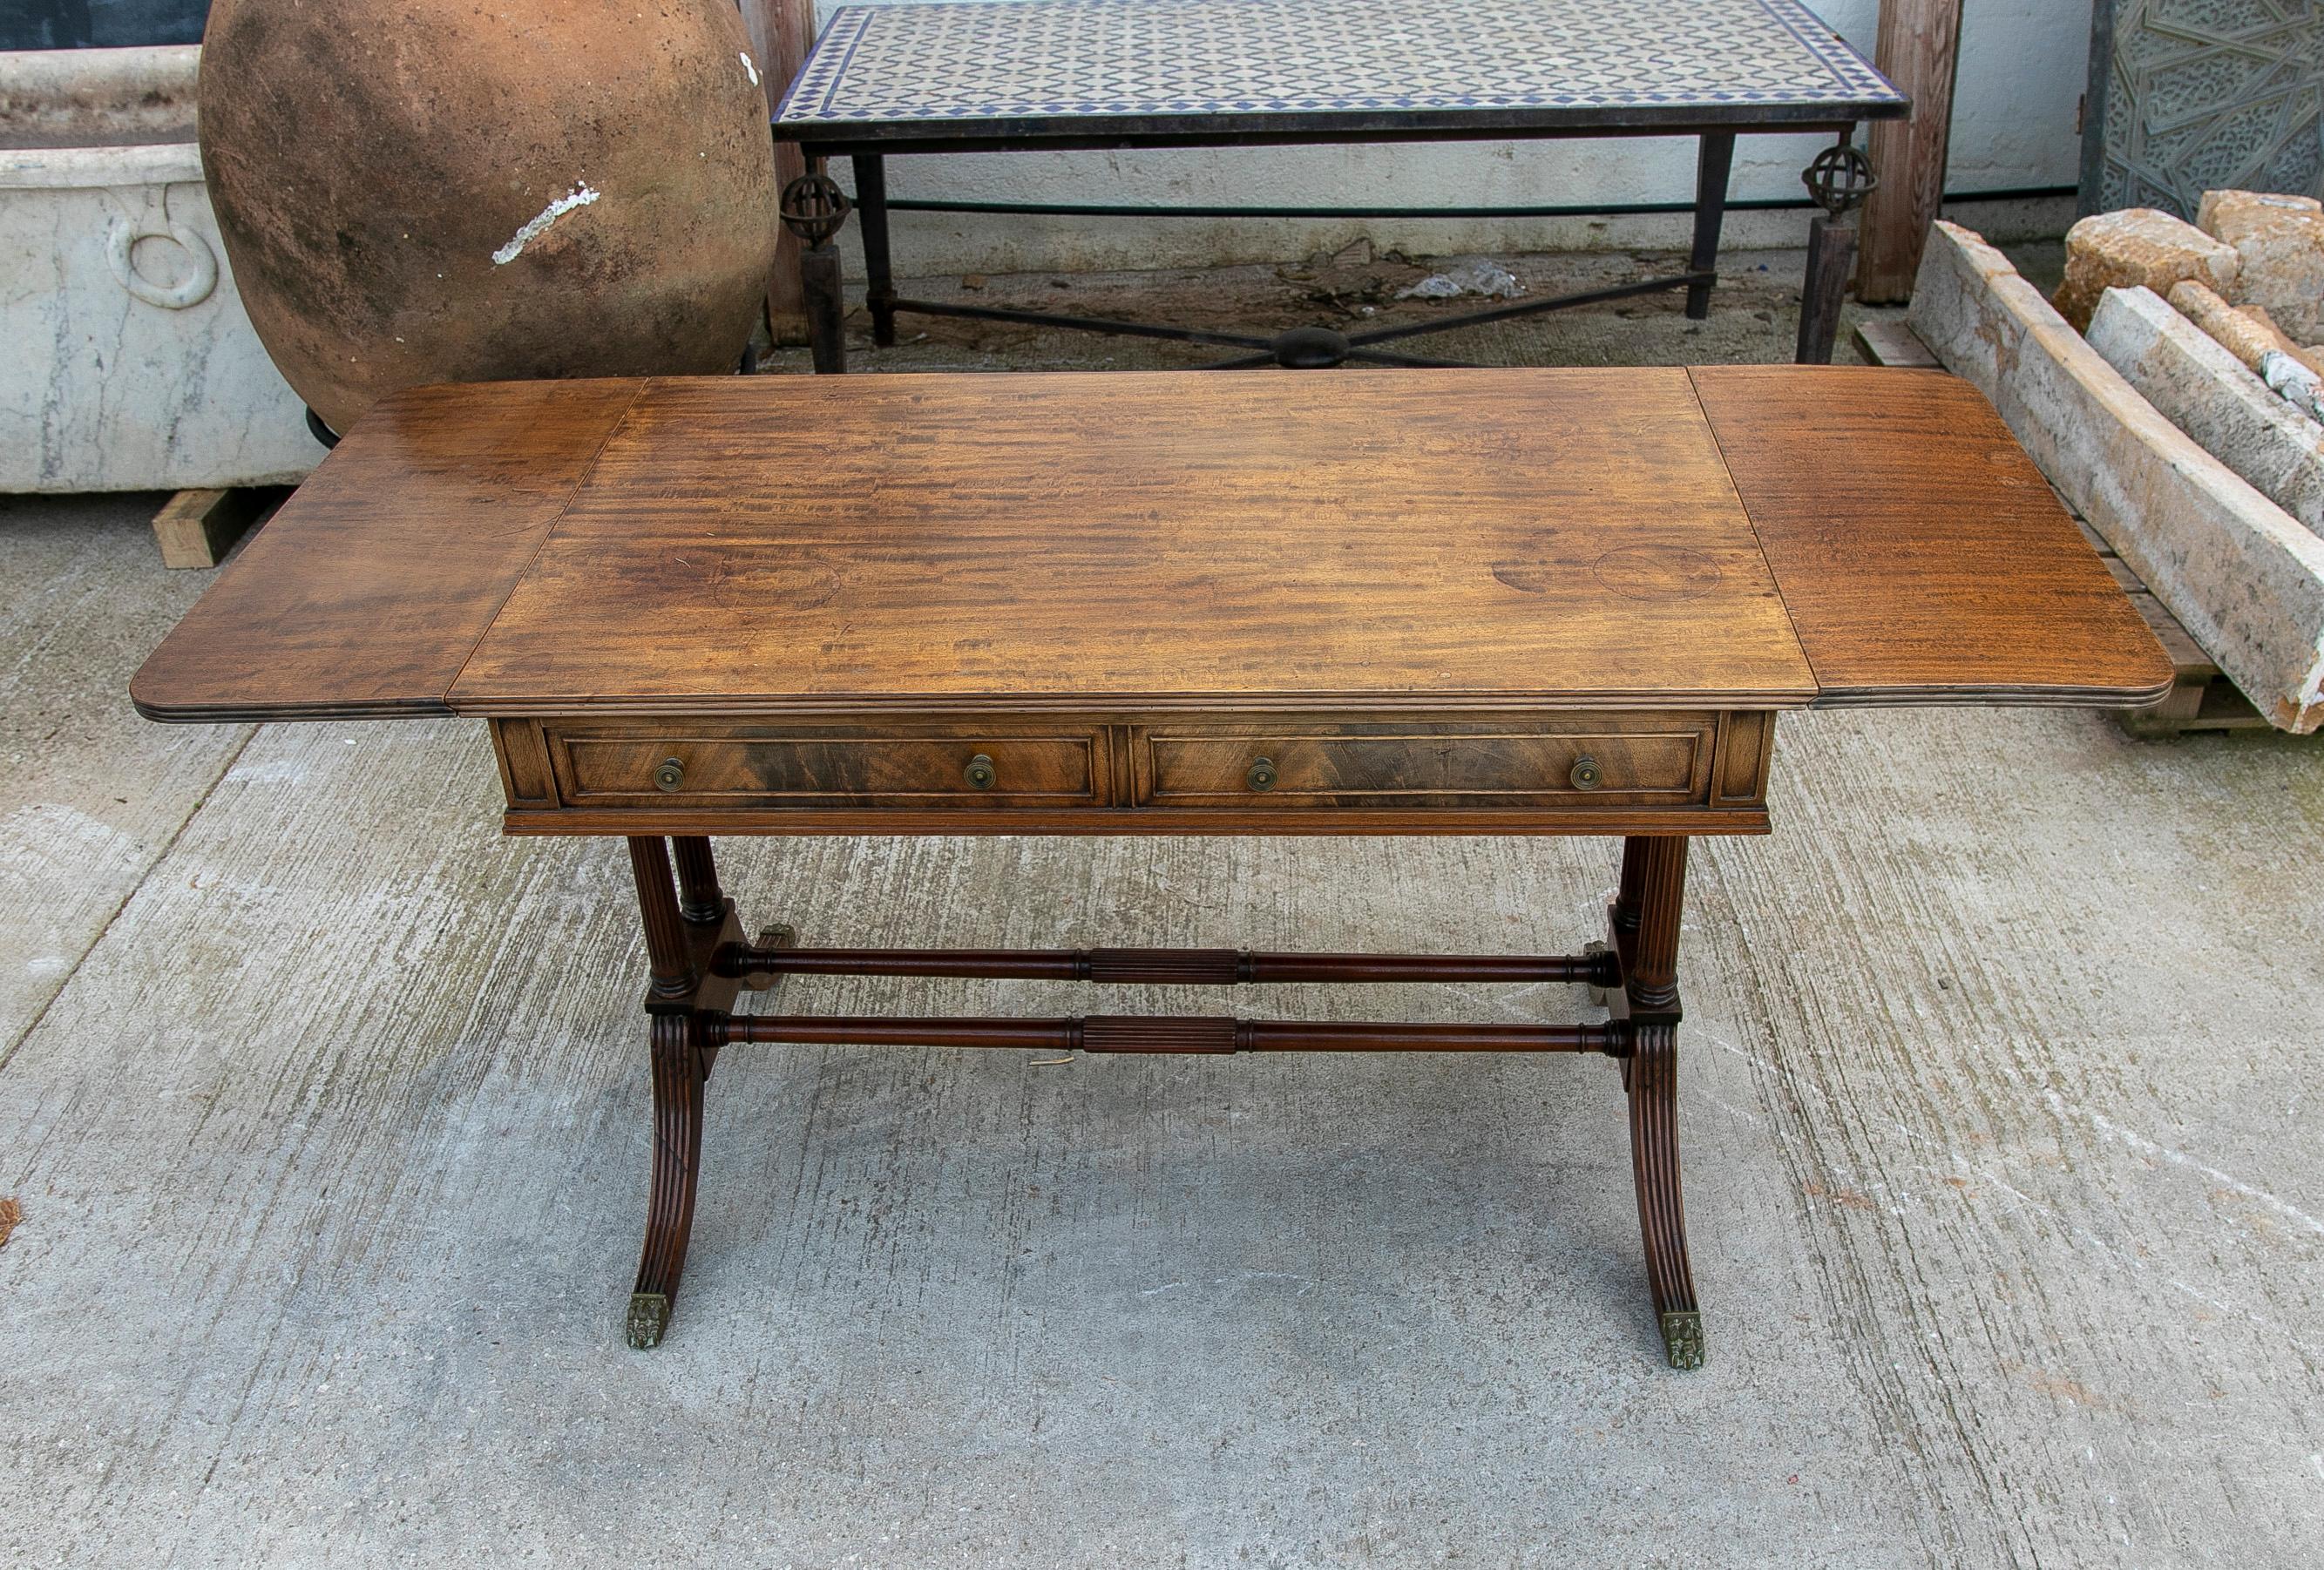 English 1950s mahogany writing table with drawers and legs with bronze lions claws.
Dimensions open table: 74 x 165 x 66cm.